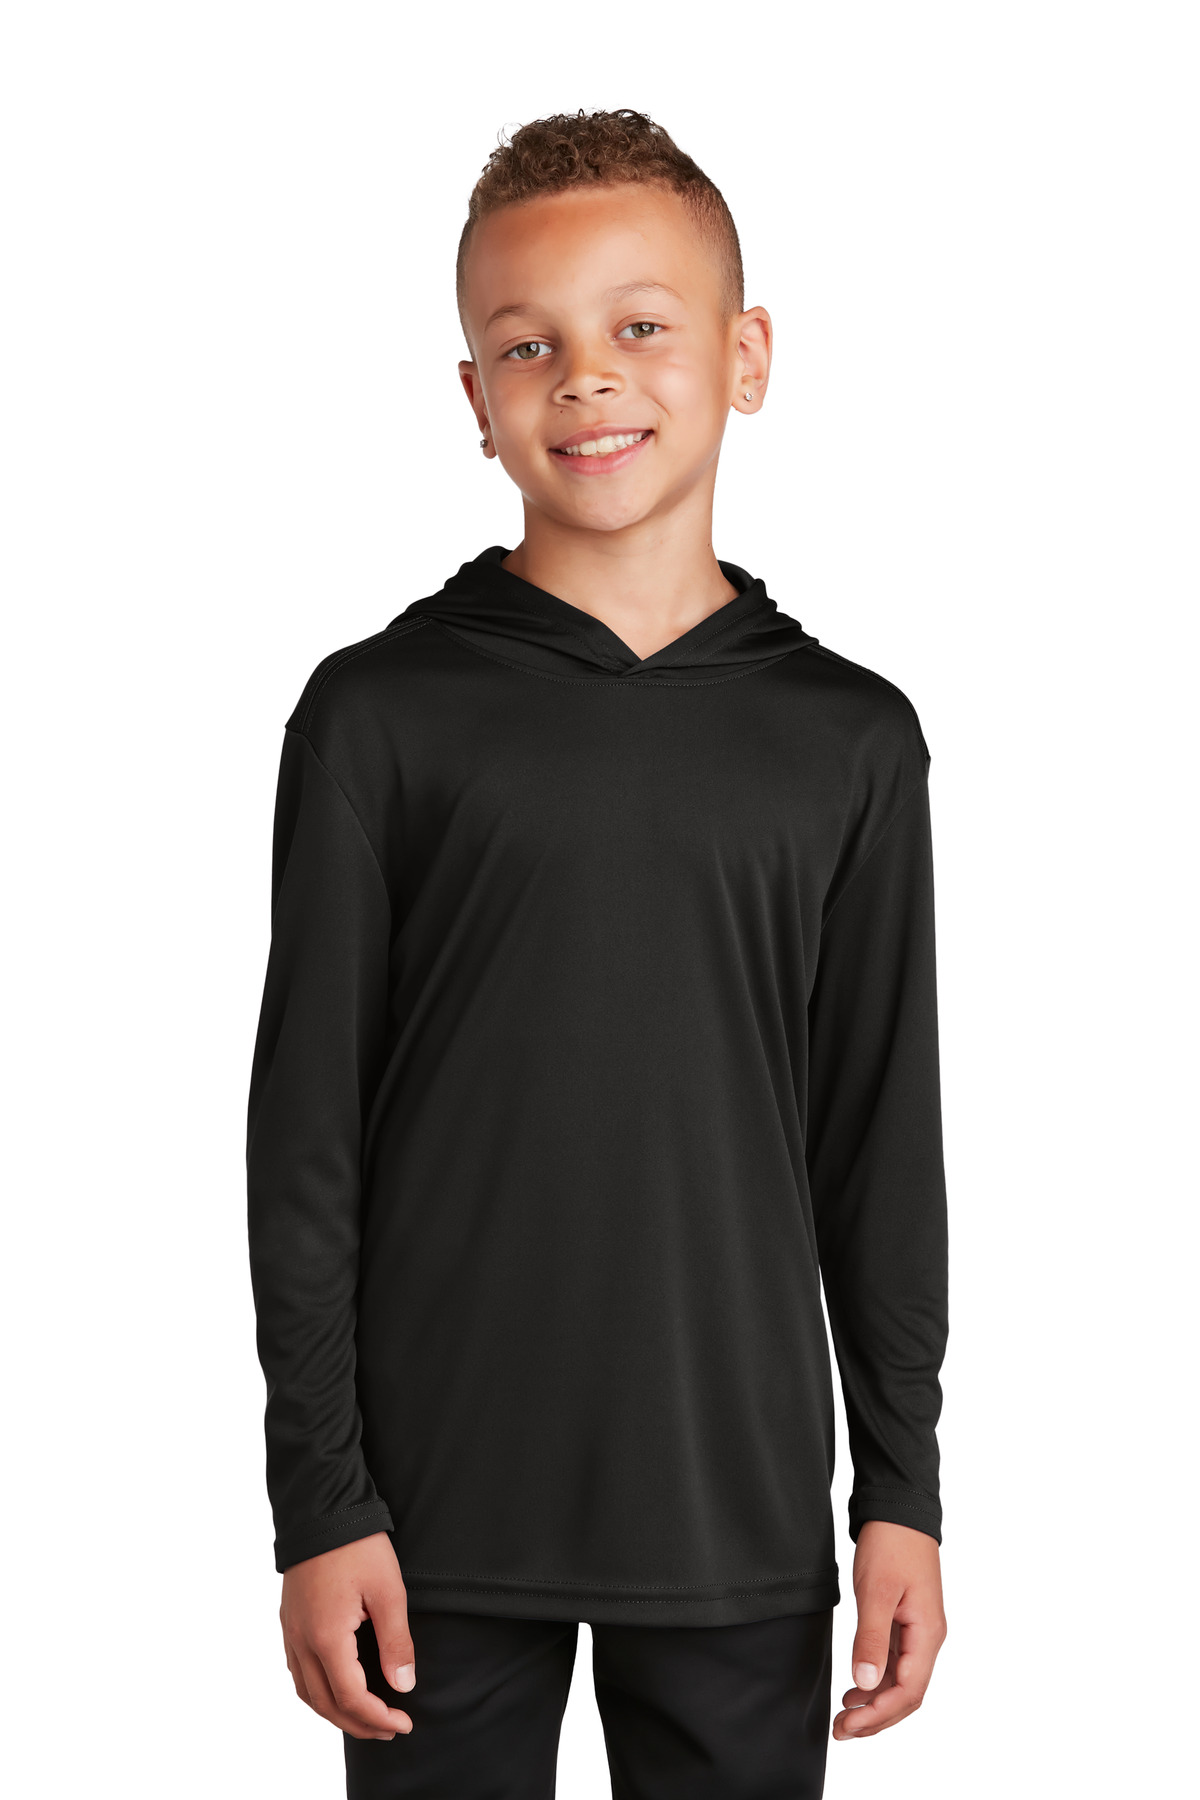 Sport-Tek Youth PosiCharge Competitor Hooded Pullover - YST358